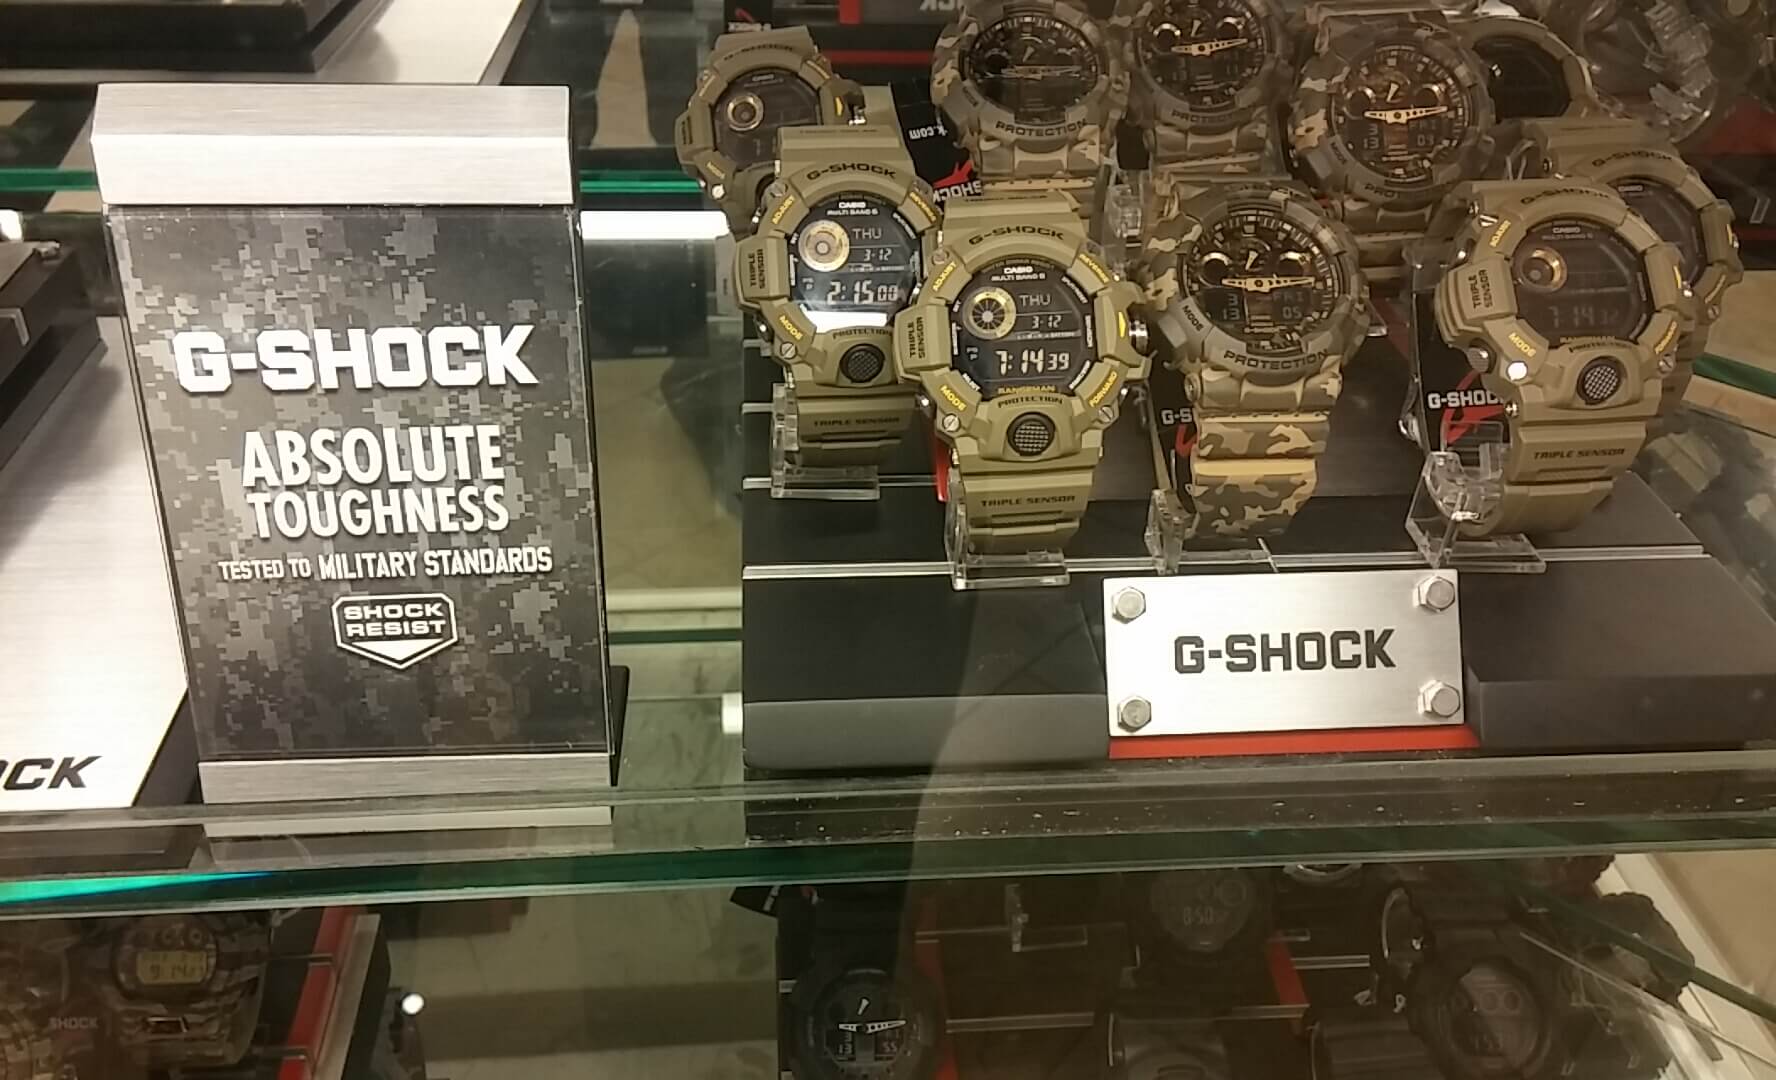 Top G Shock Watches For Military Use Under Or Around 100 G Central G Shock Watch Fan Blog